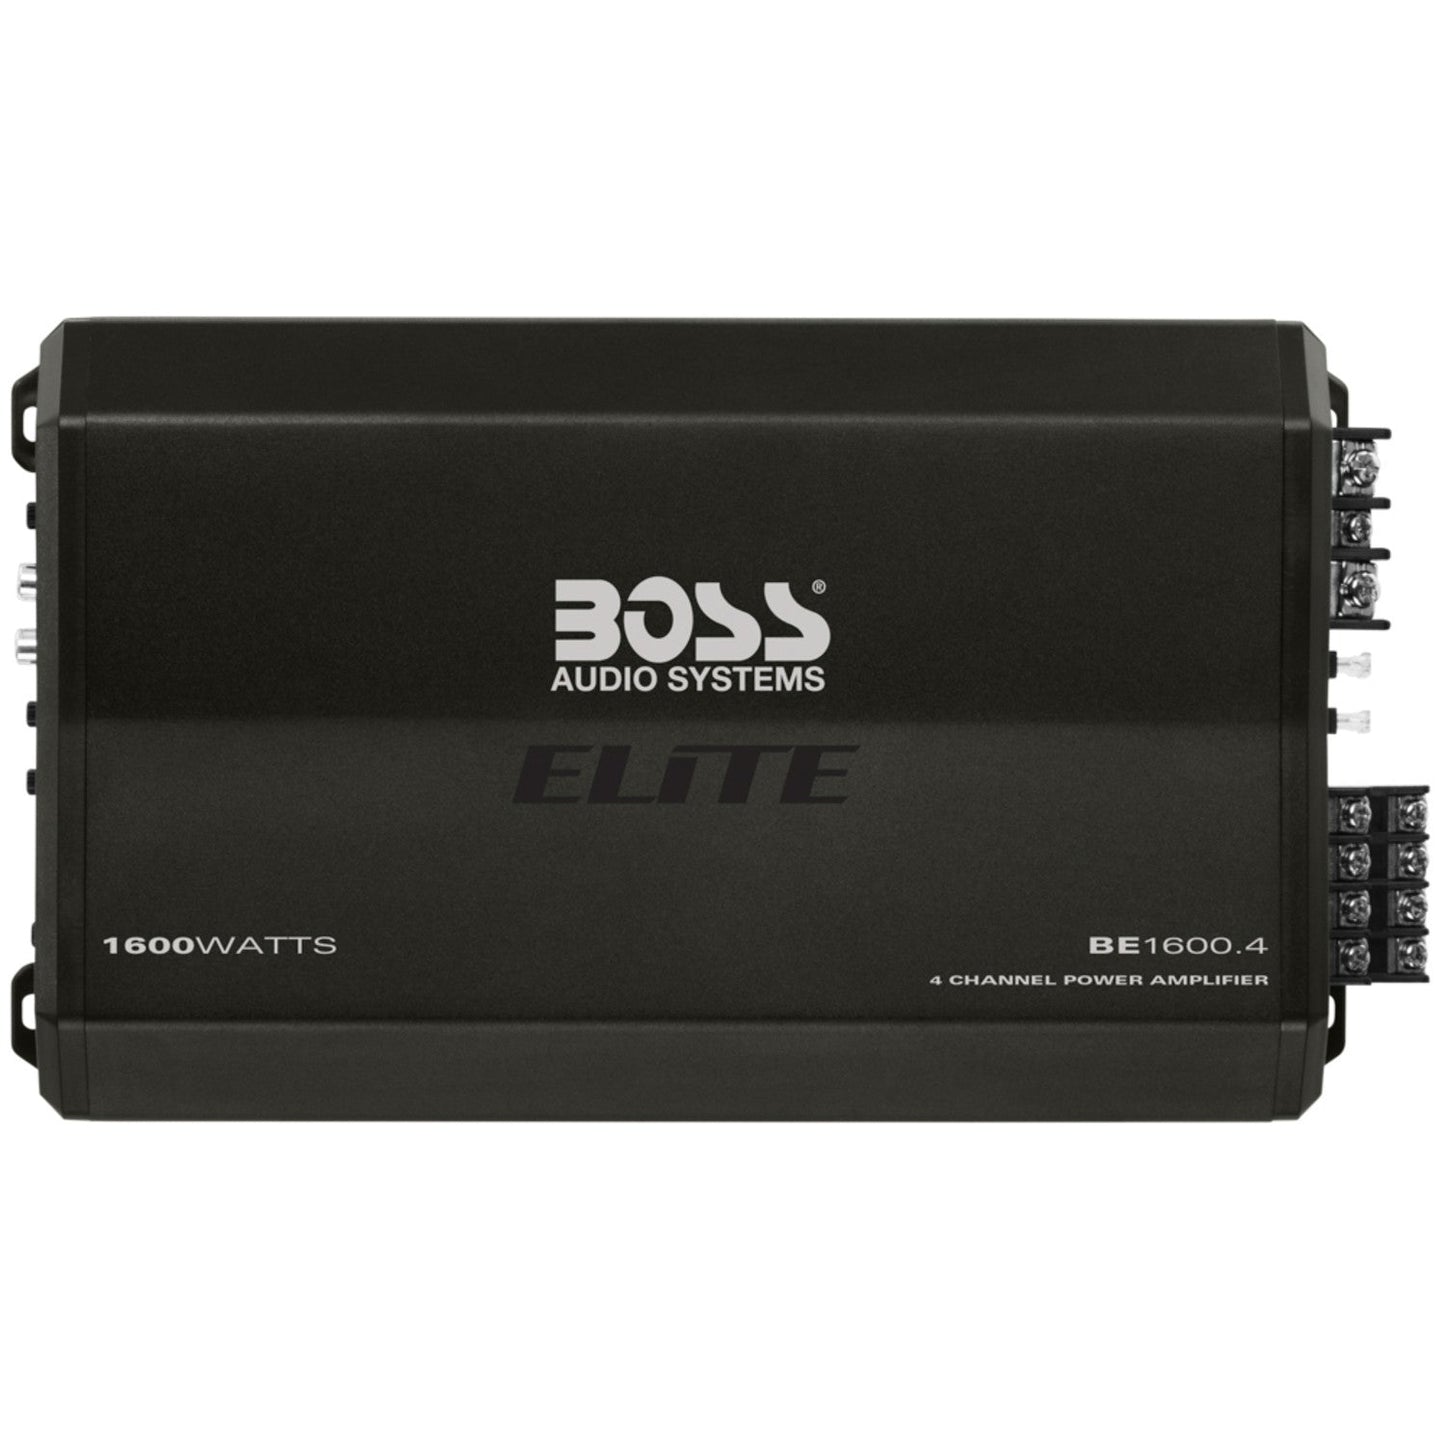 BOSS Audio Systems, Amplifiers > 4-Channel, Model BE1600.4, front face view